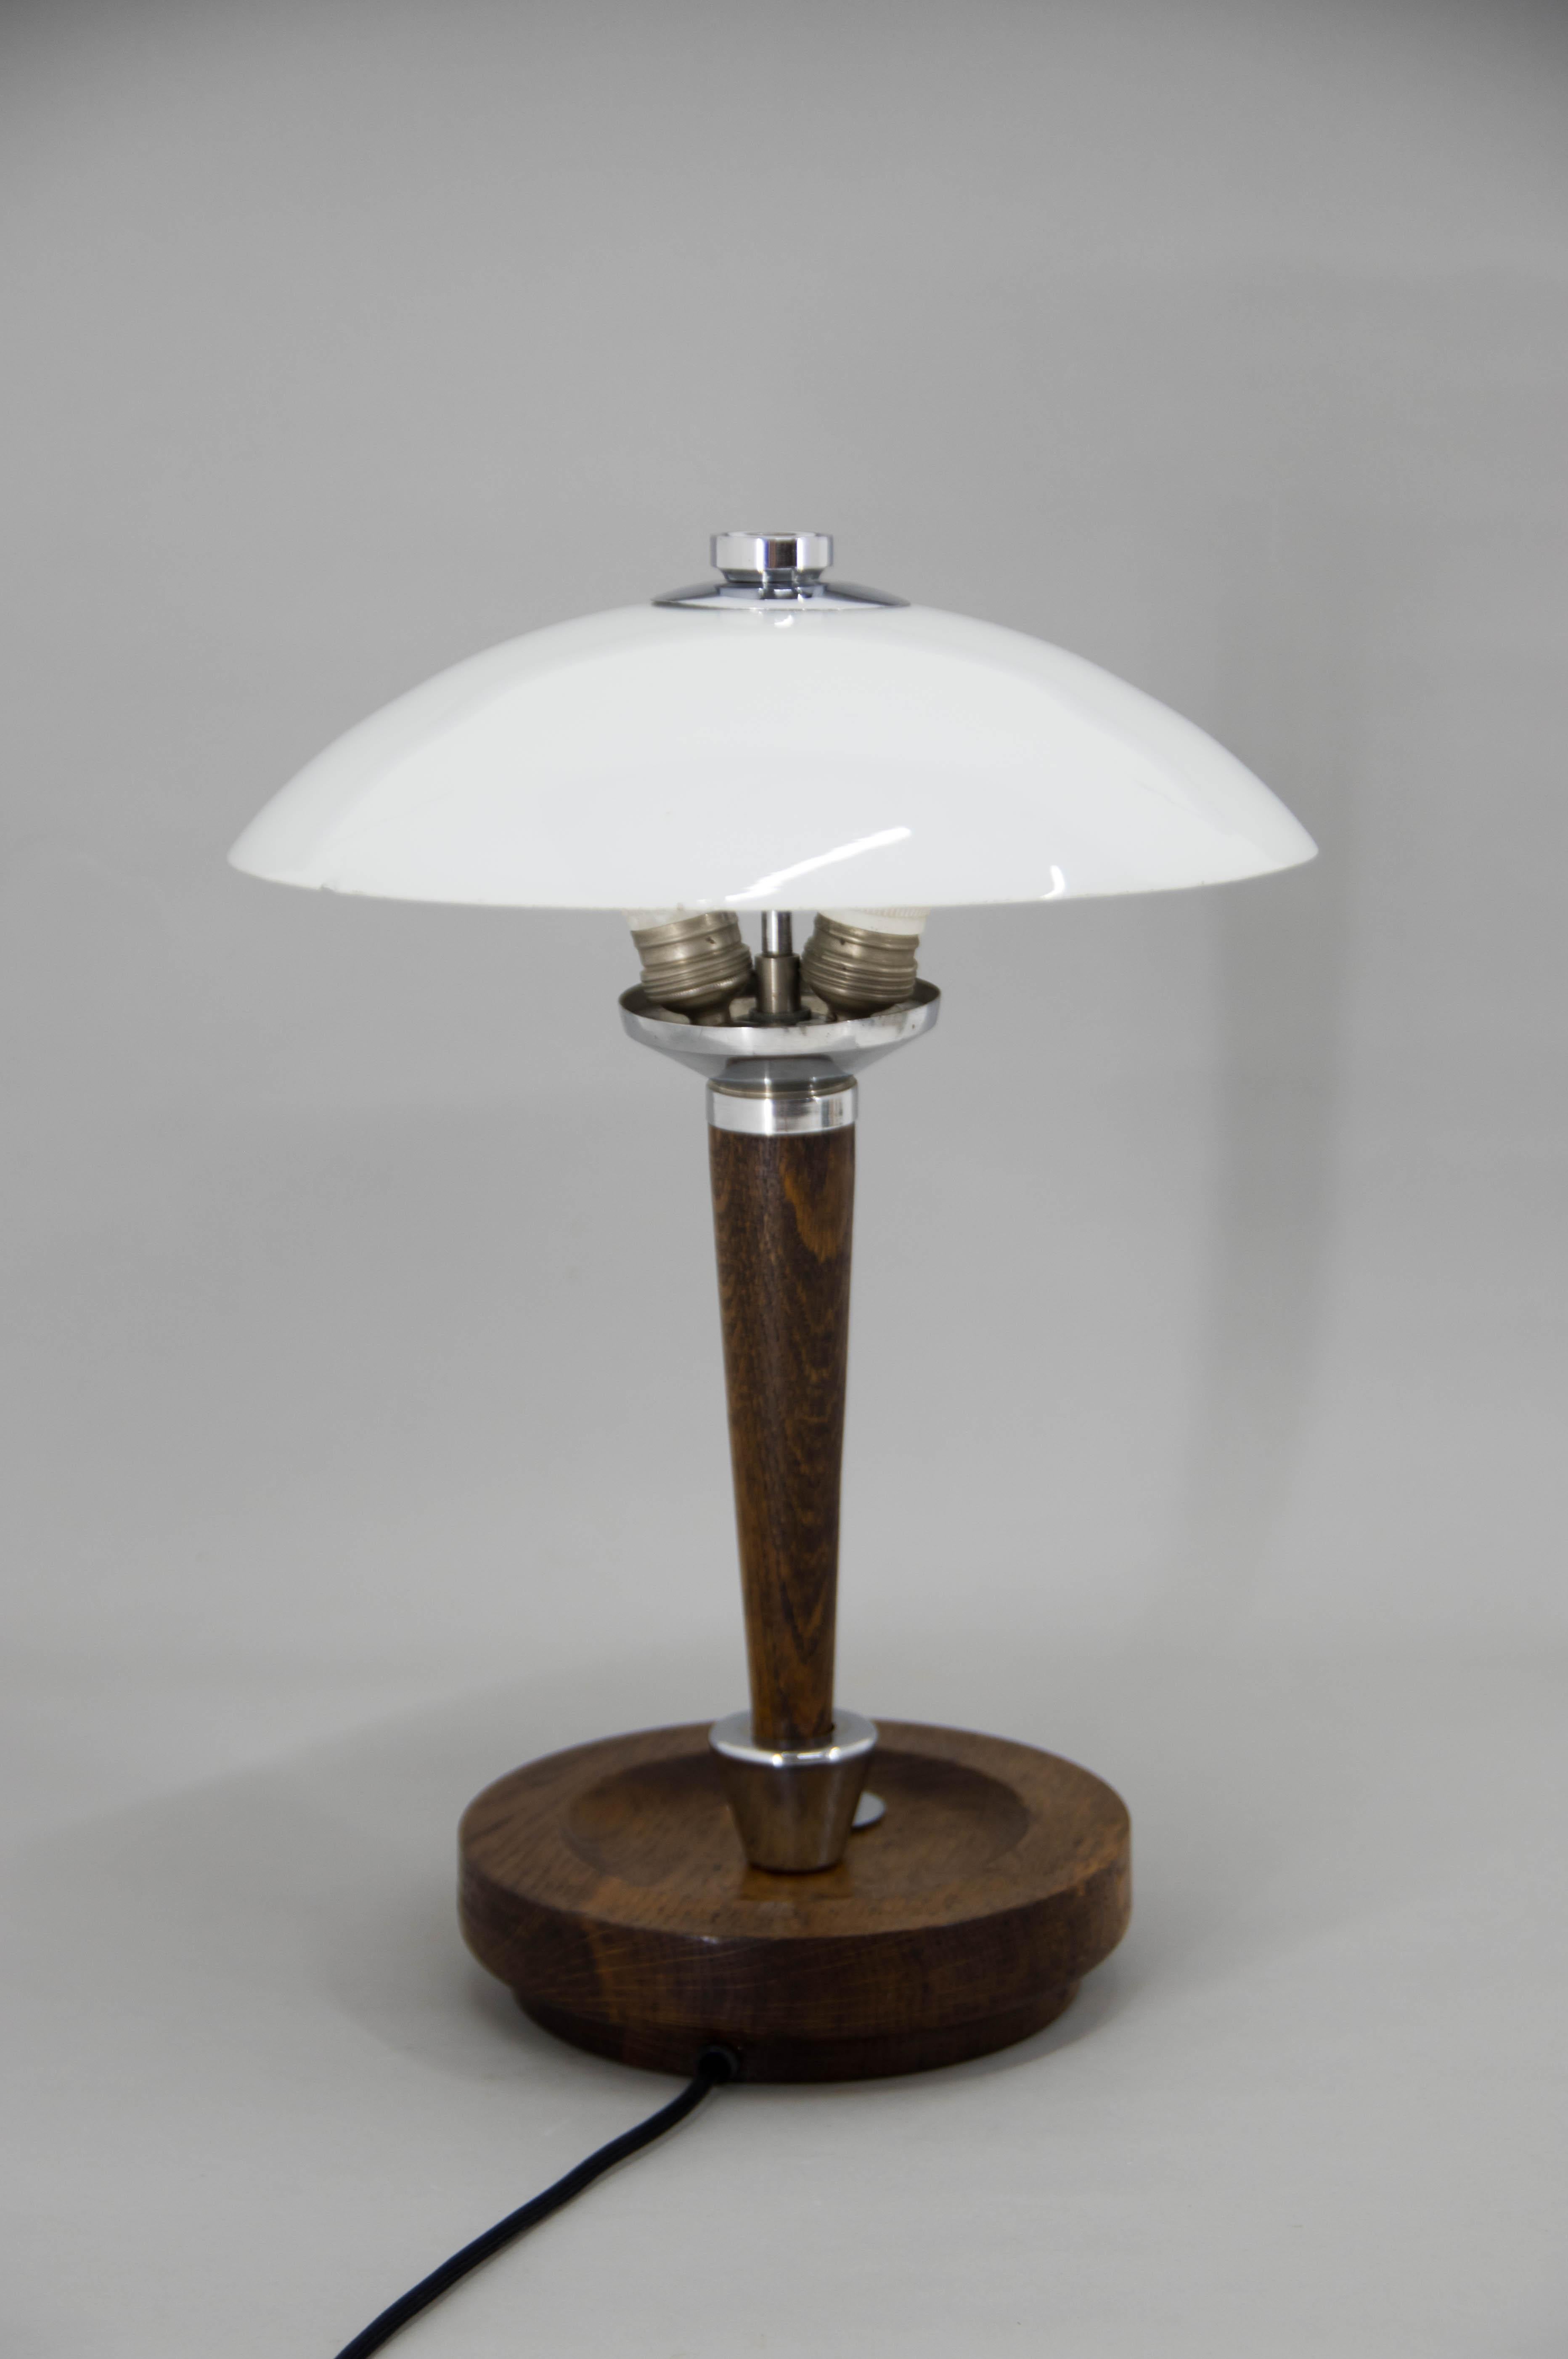 Unique Art Deco table lamp made of wood and opaline glass.
Restored: wood refinished with shellac.
Opaline glass with small dents see photo.
Rewired: 2x40W, E25-E27 bulbs.
US plug adapter included.